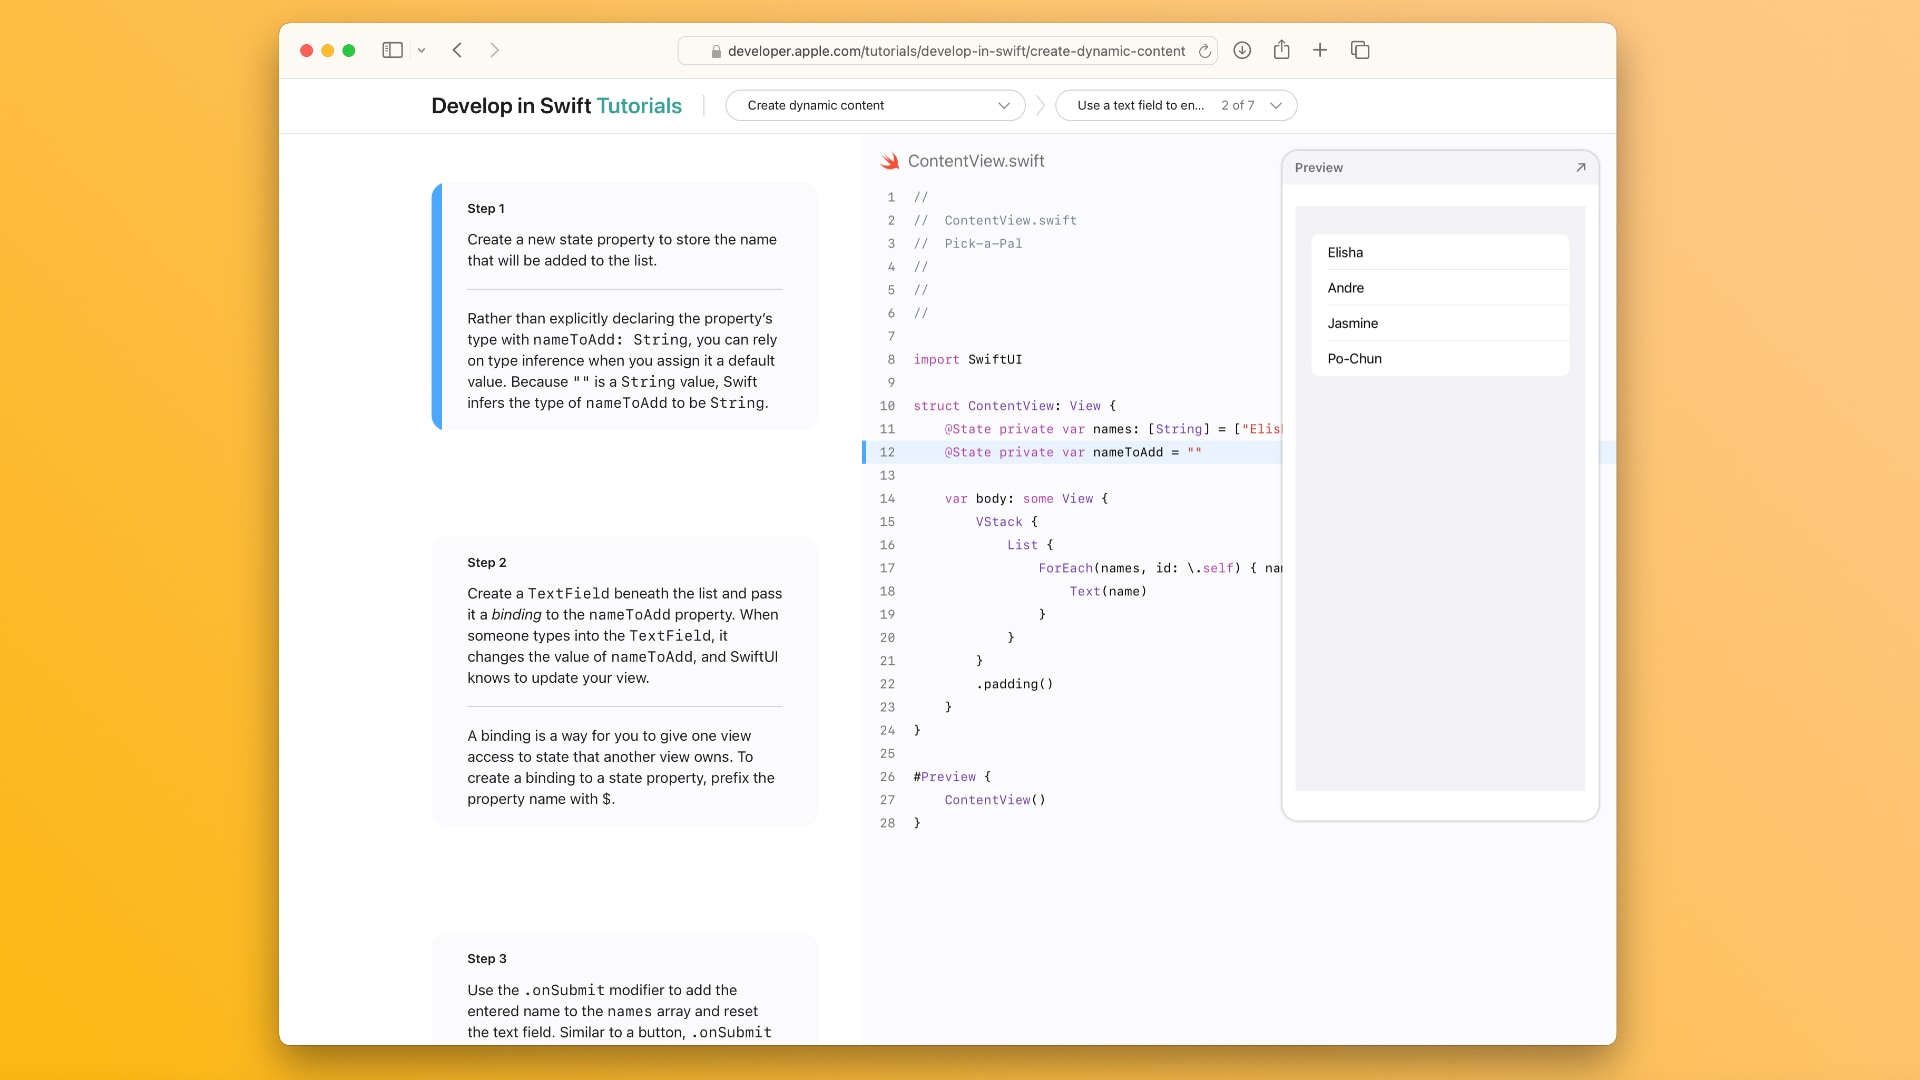 Safari screenshot of Apple's Develop in Swift Tutorials page with some code examples